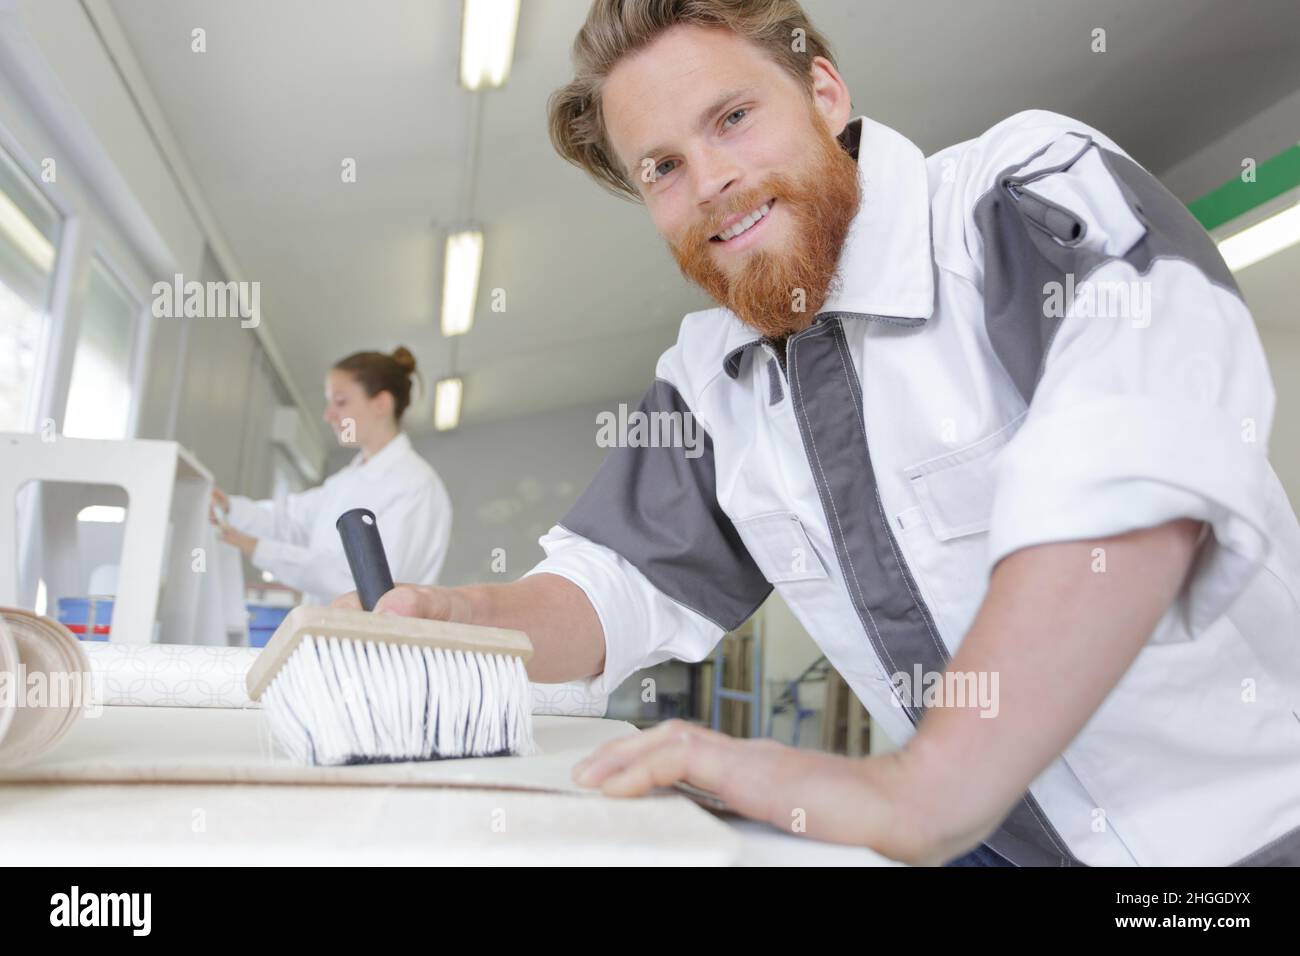 contractor worker preparing for wallpaper decoration Stock Photo